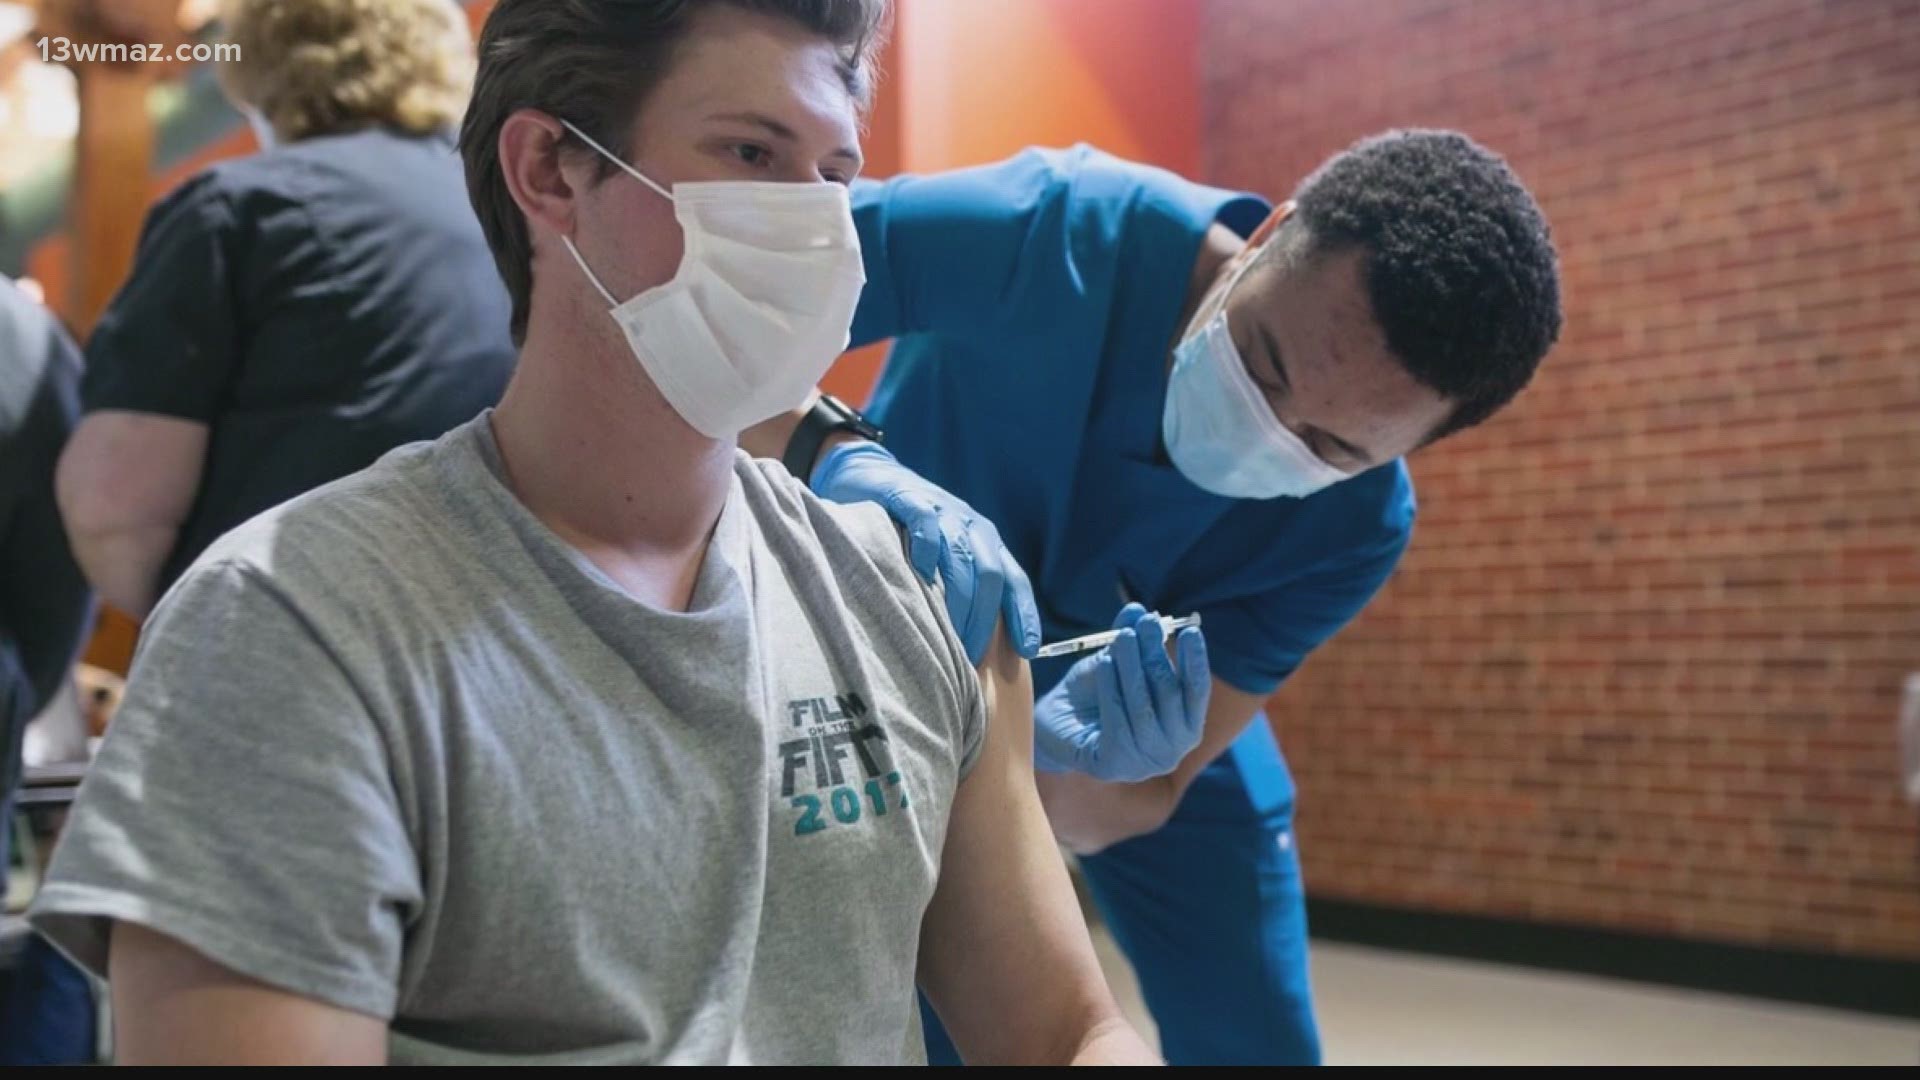 President Joe Biden and the U.S. Department of Education are enlisting the help of college campuses to get 70 percent of Americans vaccinated by July 4.